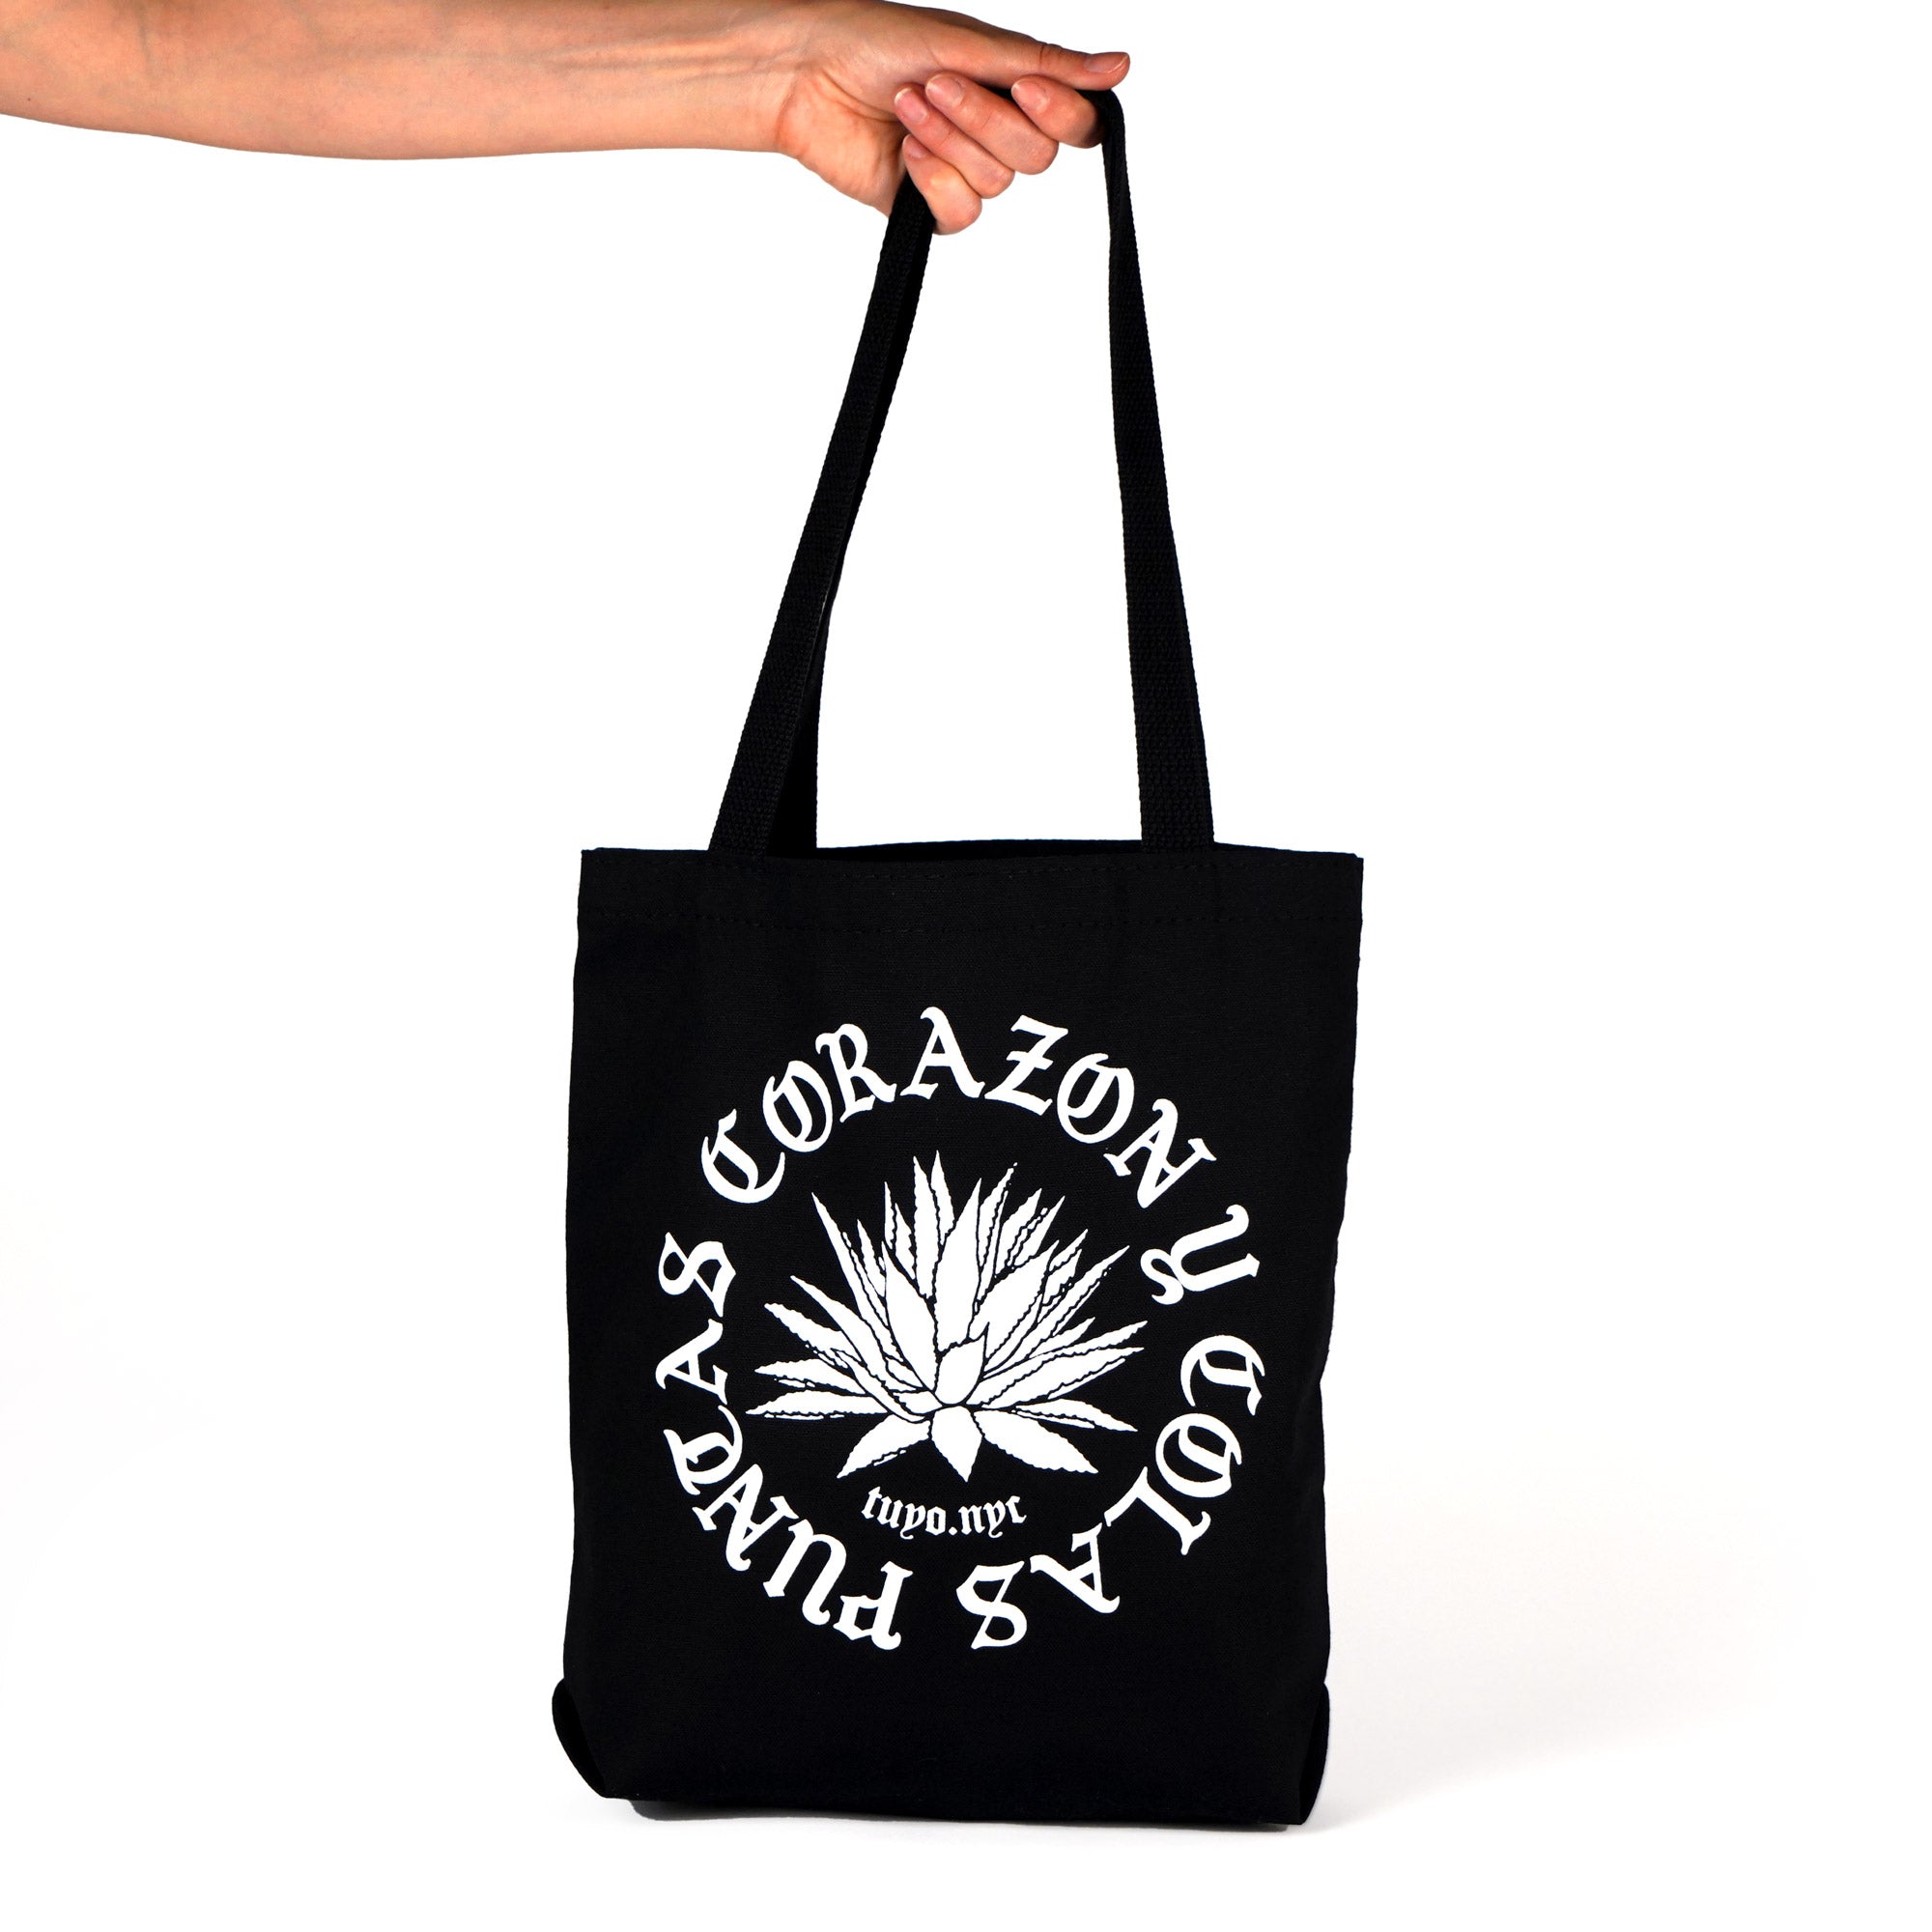 Mezcal tote bag black canvas with a white agave and the words Puntas, Corazon y Colas